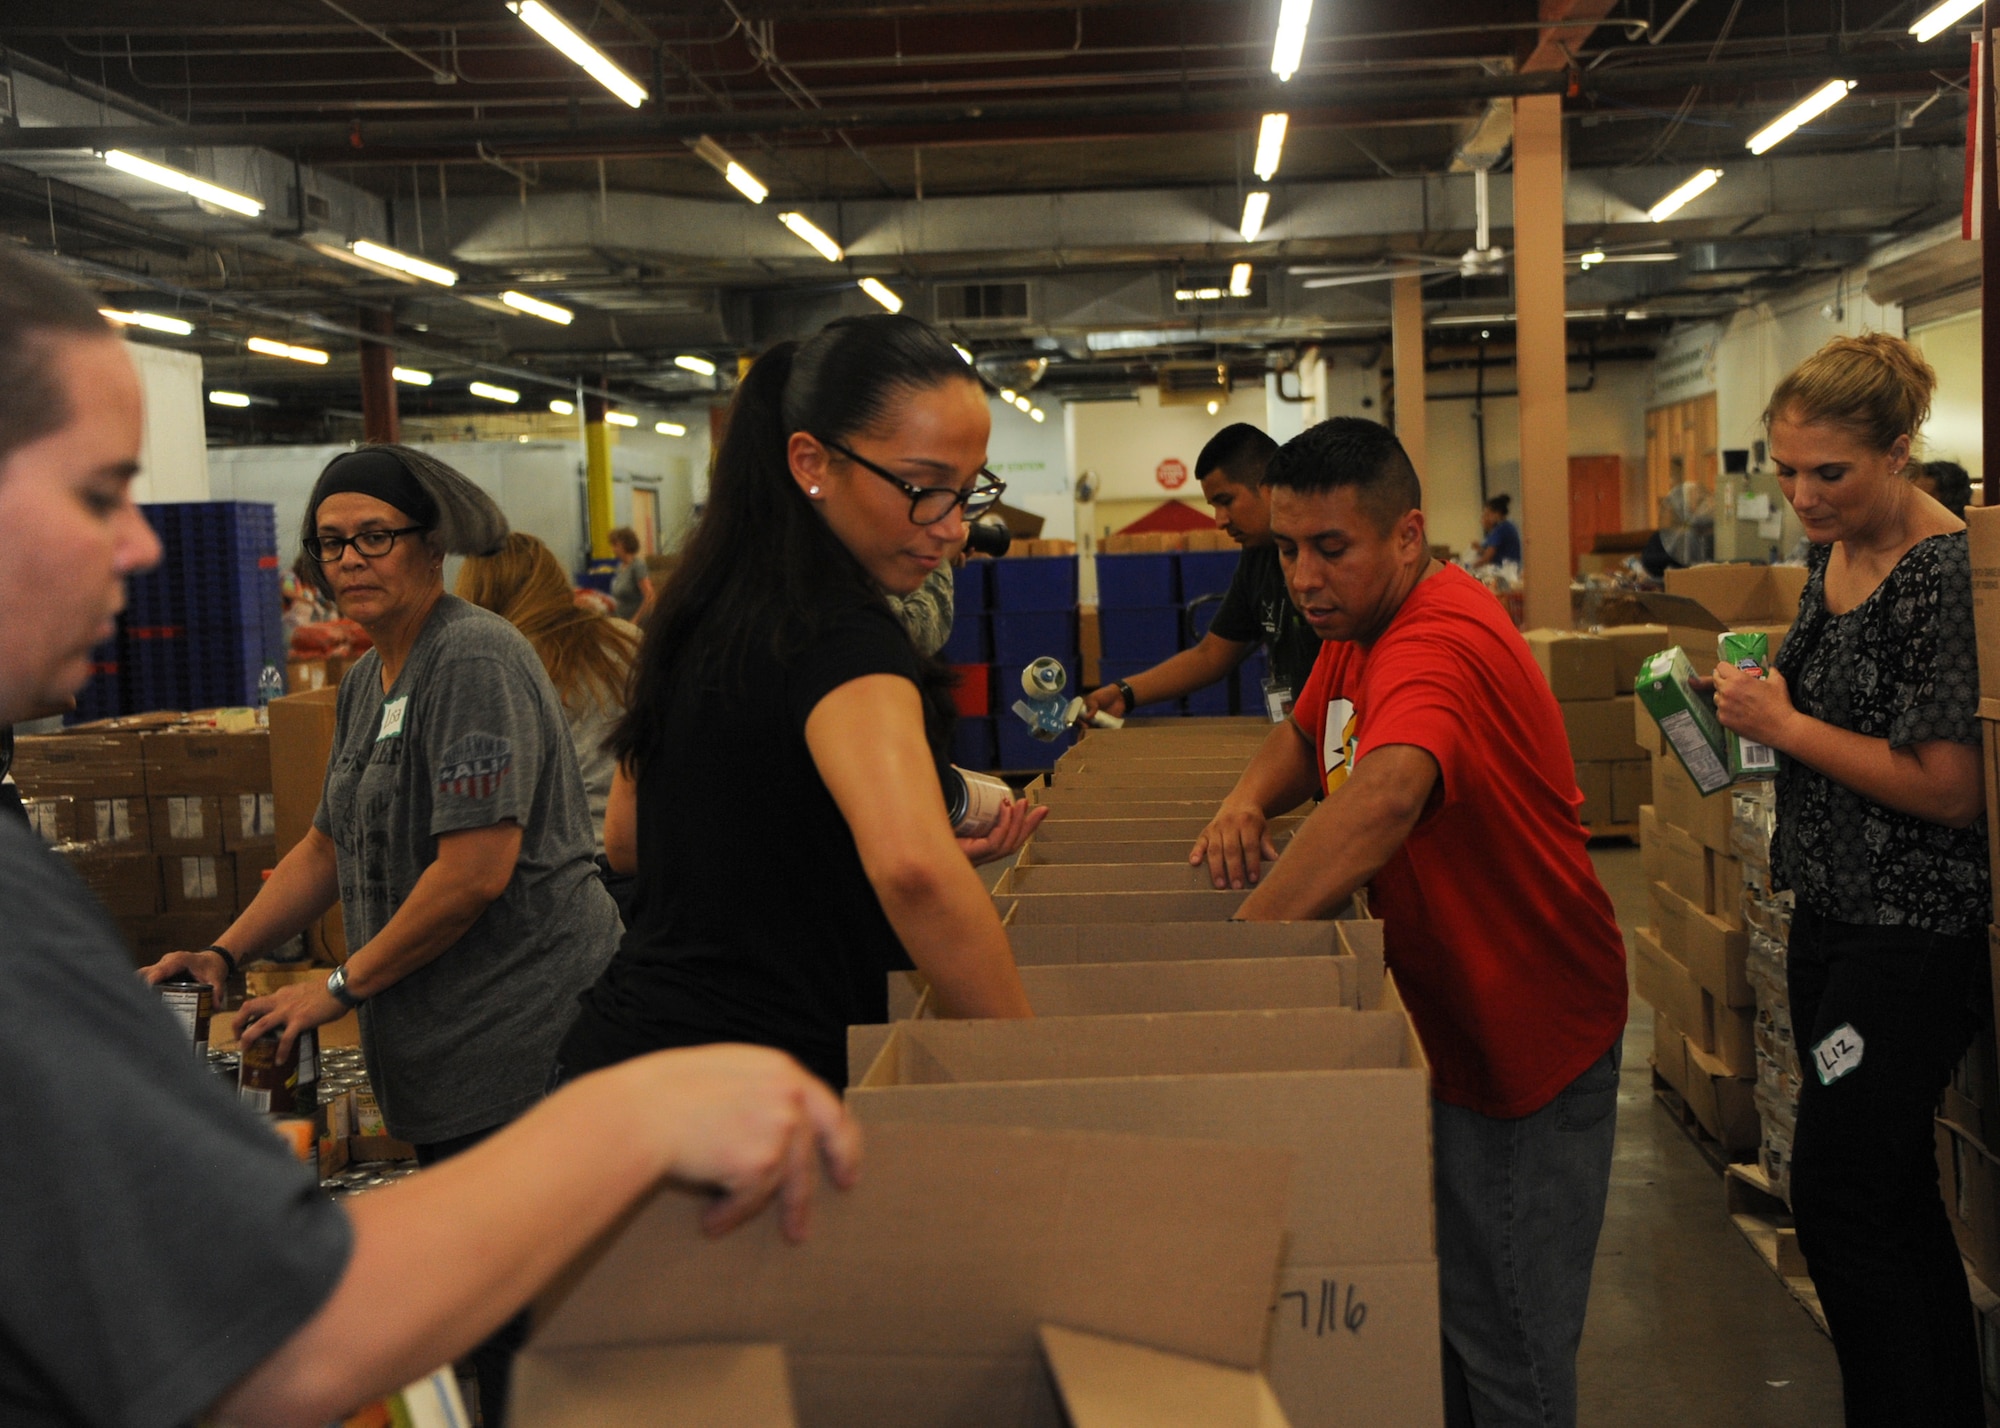 U.S. Airmen and civilians from the 355th Comptroller Squadron volunteer at the Food Bank of Southern Arizona, Ariz., in Tucson, July 14, 2016. They participated in a three hour volunteer shift, which involved sorting and boxing different kinds of nonperishable foods. (U.S. Air Force photo by Airman Nathan H. Barbour/Released)